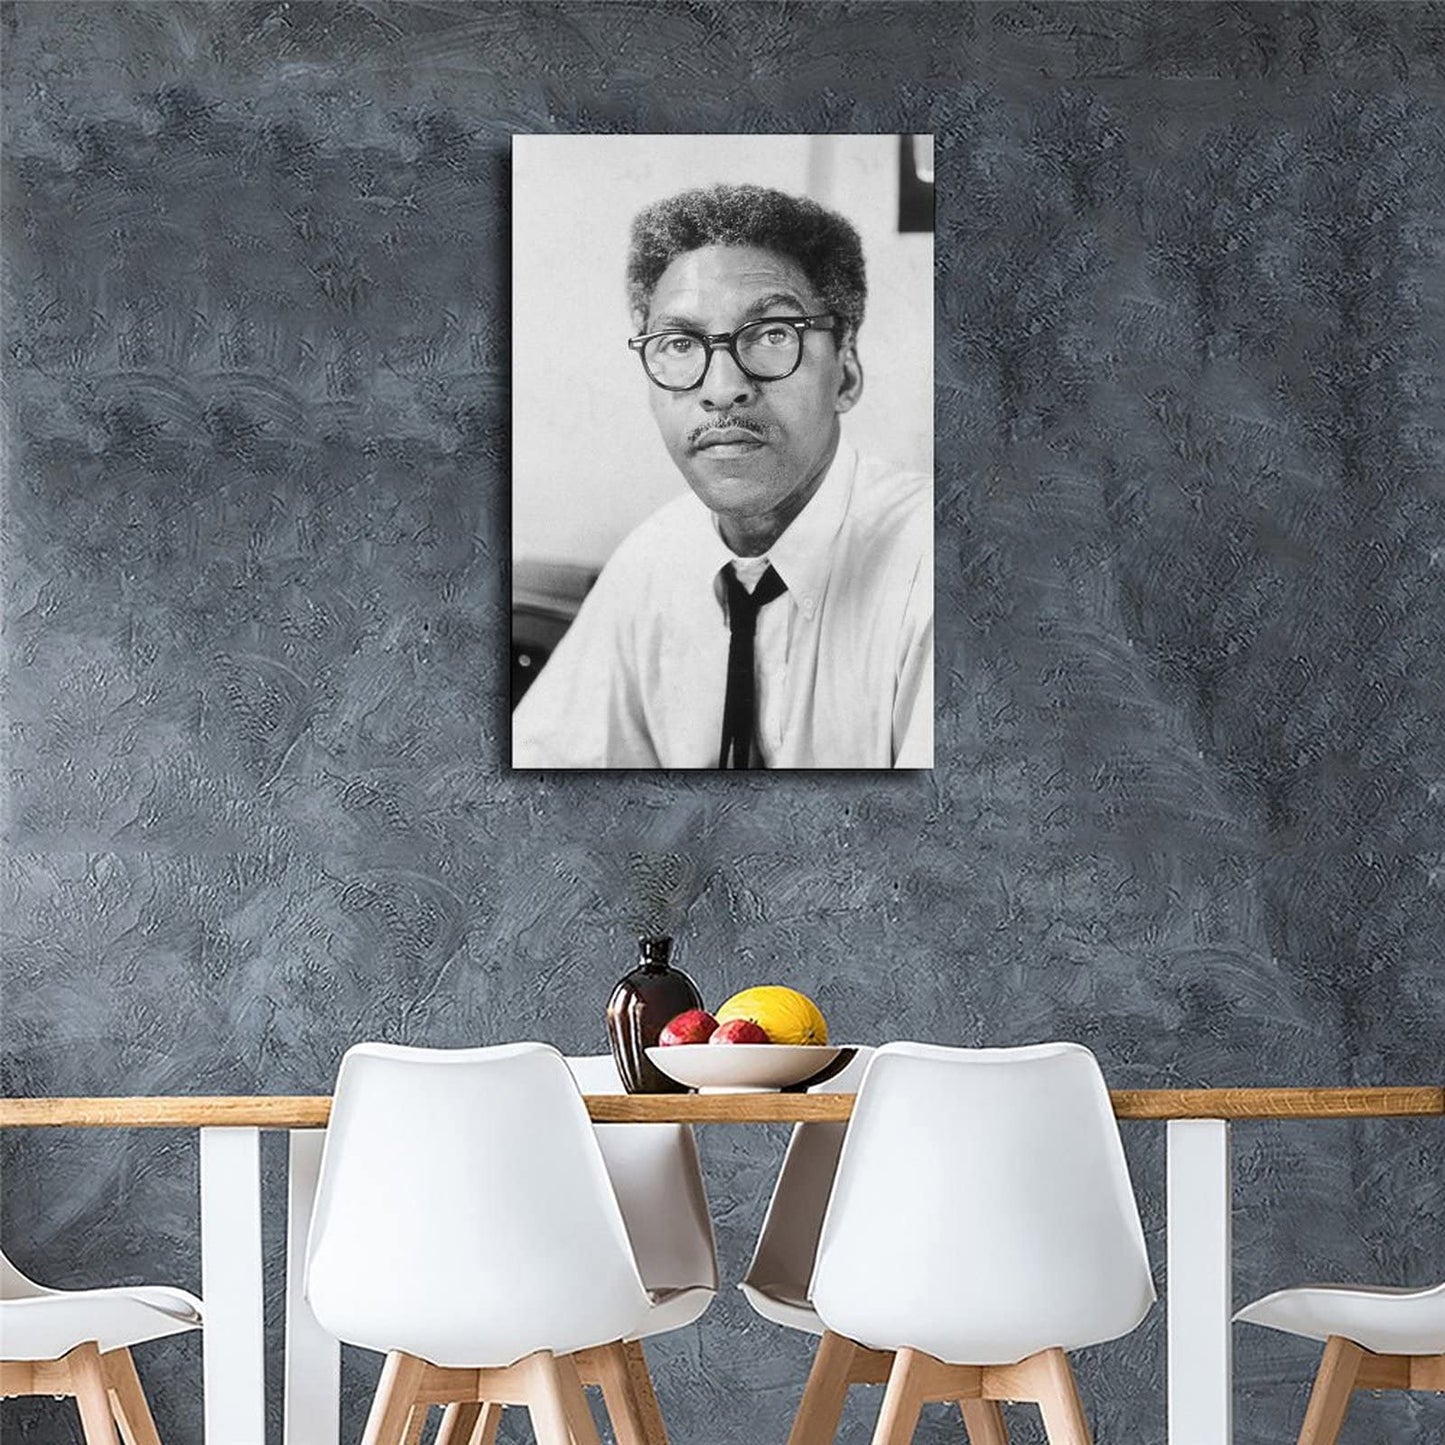 ZEEZFA Inspirational Quotes by Bayard Rustin Canvas Art Poster and Wall Art Picture Print Modern Family Bedroom Decor Posters 08x12inch(20x30cm)